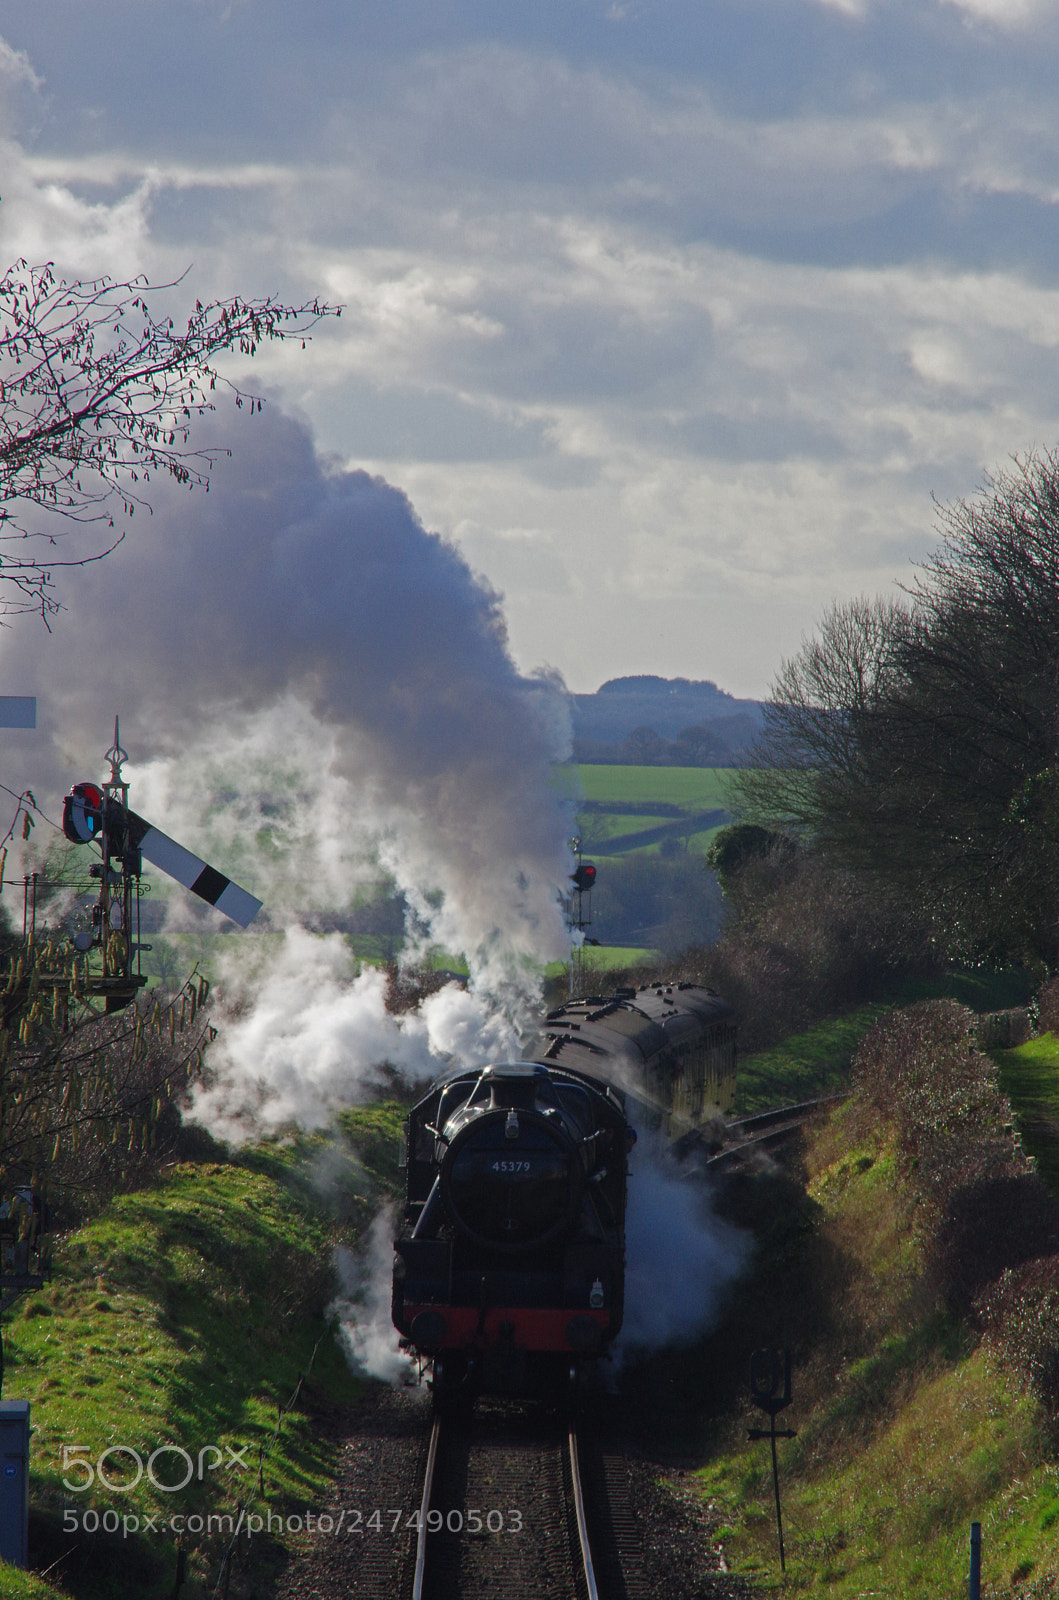 Pentax K-3 sample photo. Rd16271.  45379 approaching ropley. photography